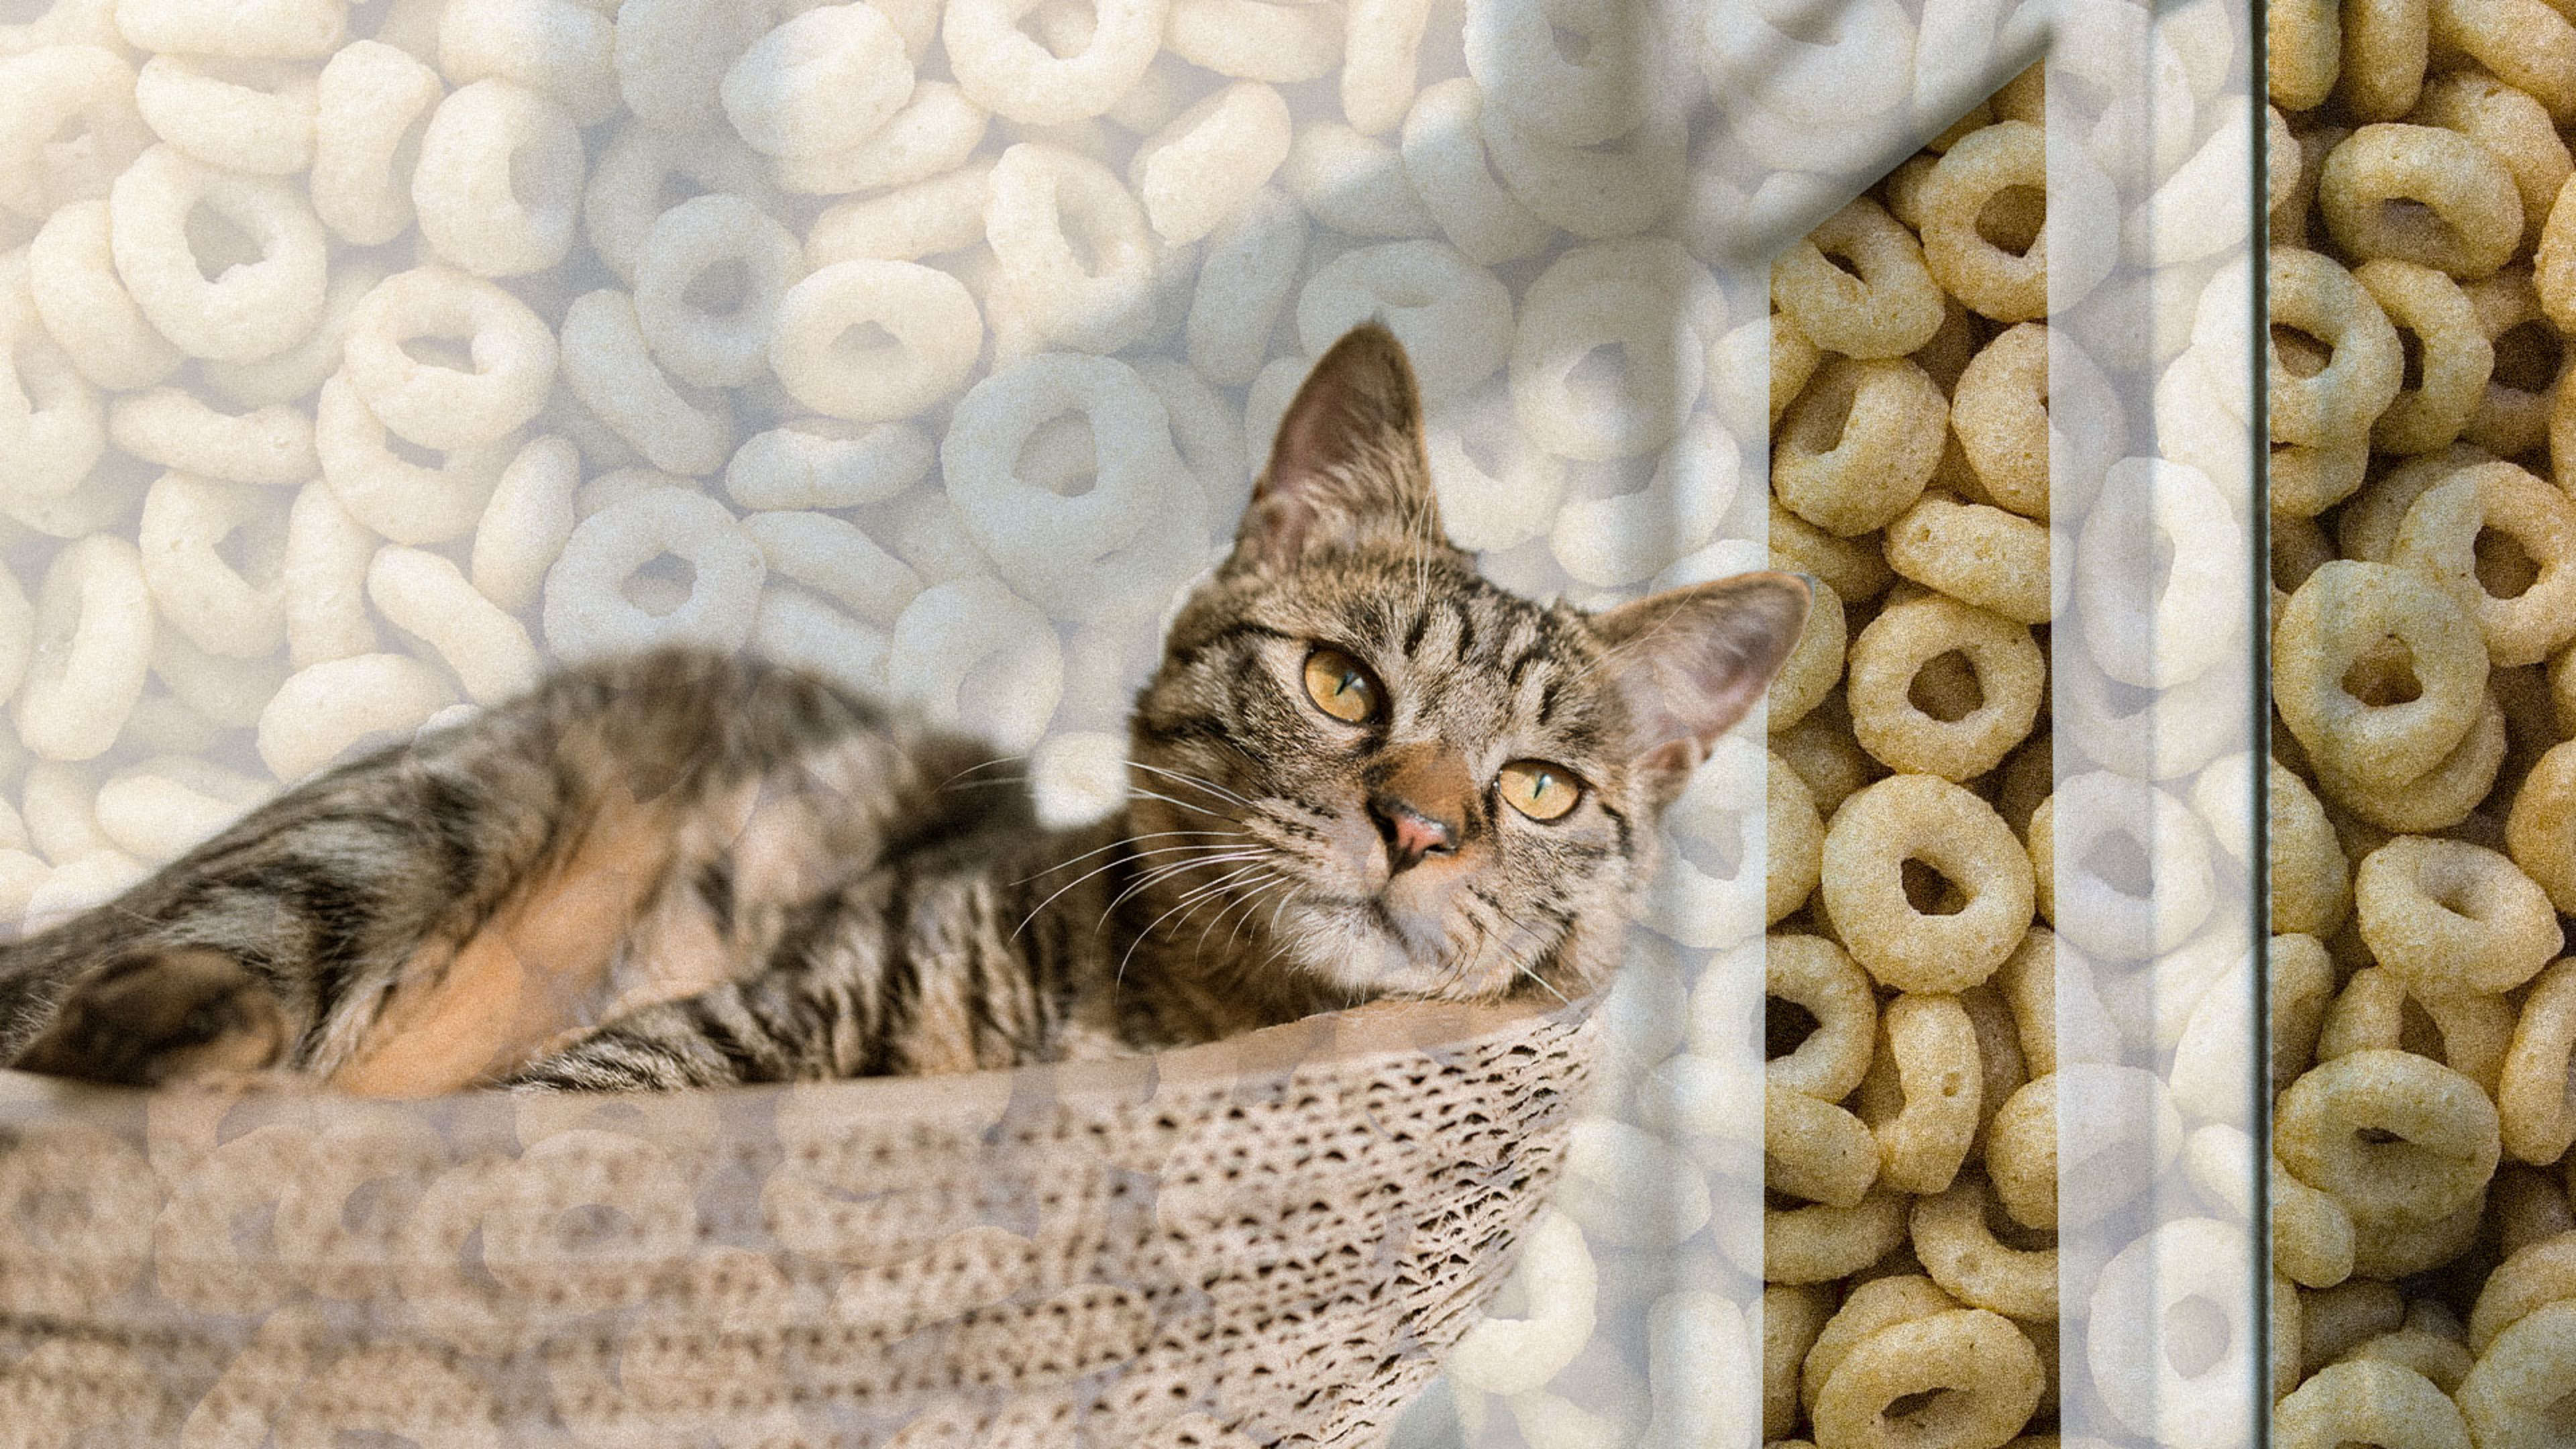 Why cereal giant General Mills is increasingly cozying up to your pampered pets